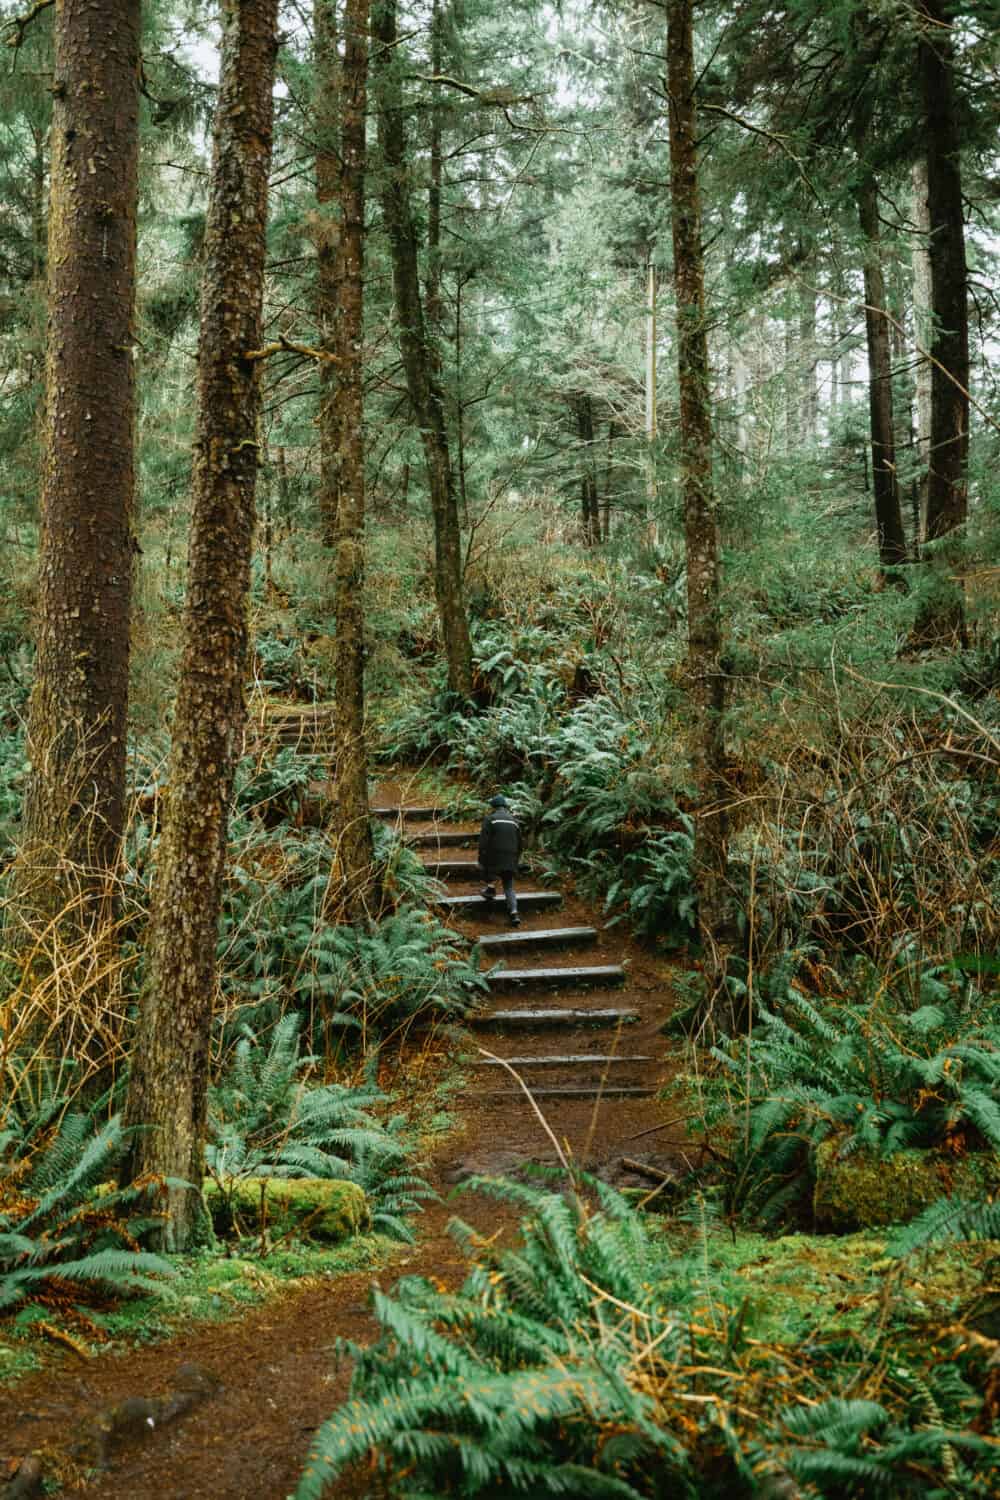 Wooden stairs at the beginning of Crescent Beach Trail